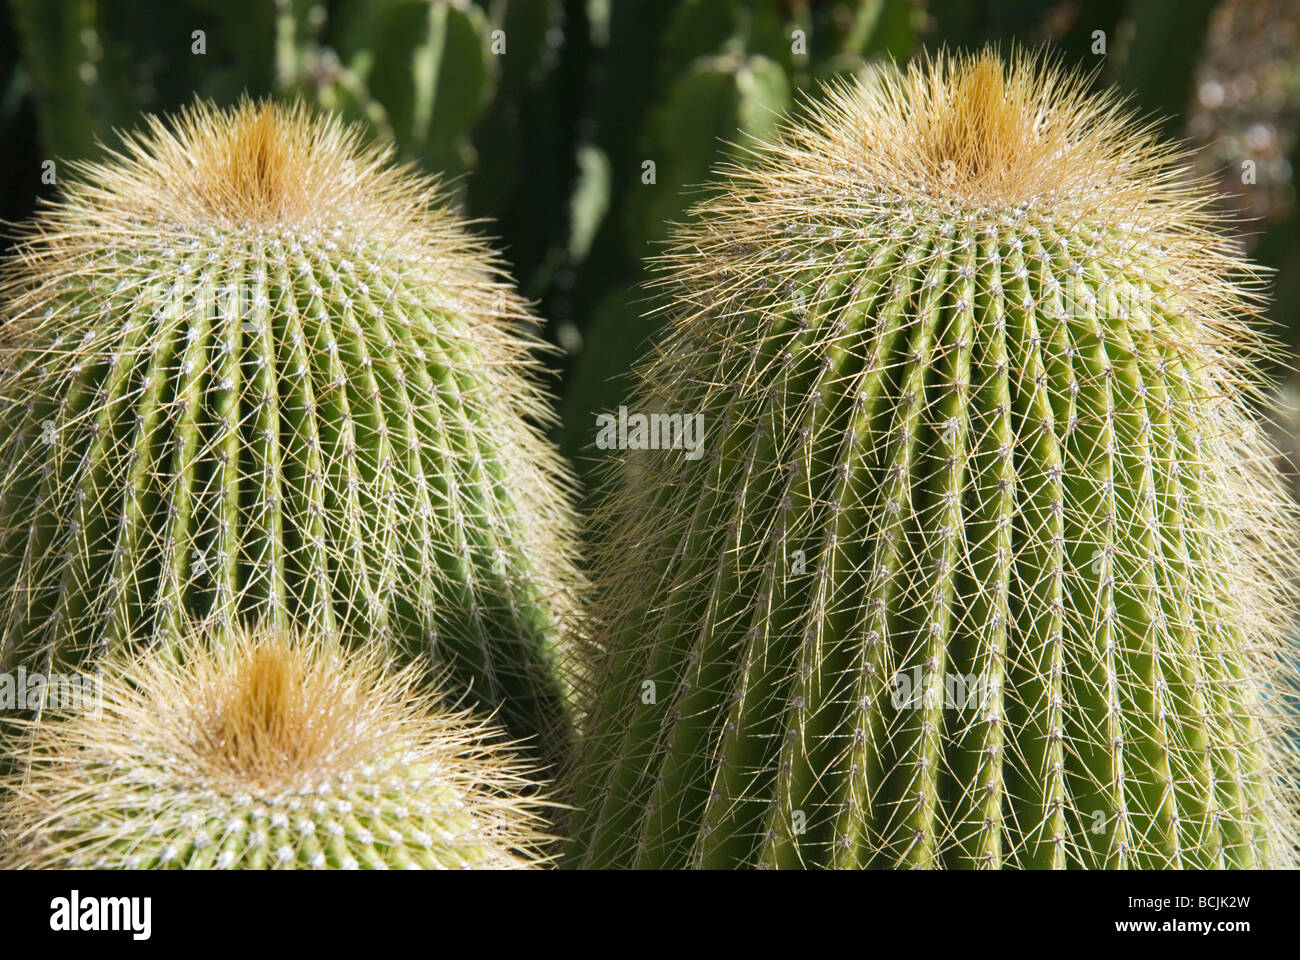 Cactus in the village Fornalutx on the Balearic Island Mallorca, Spain. Stock Photo